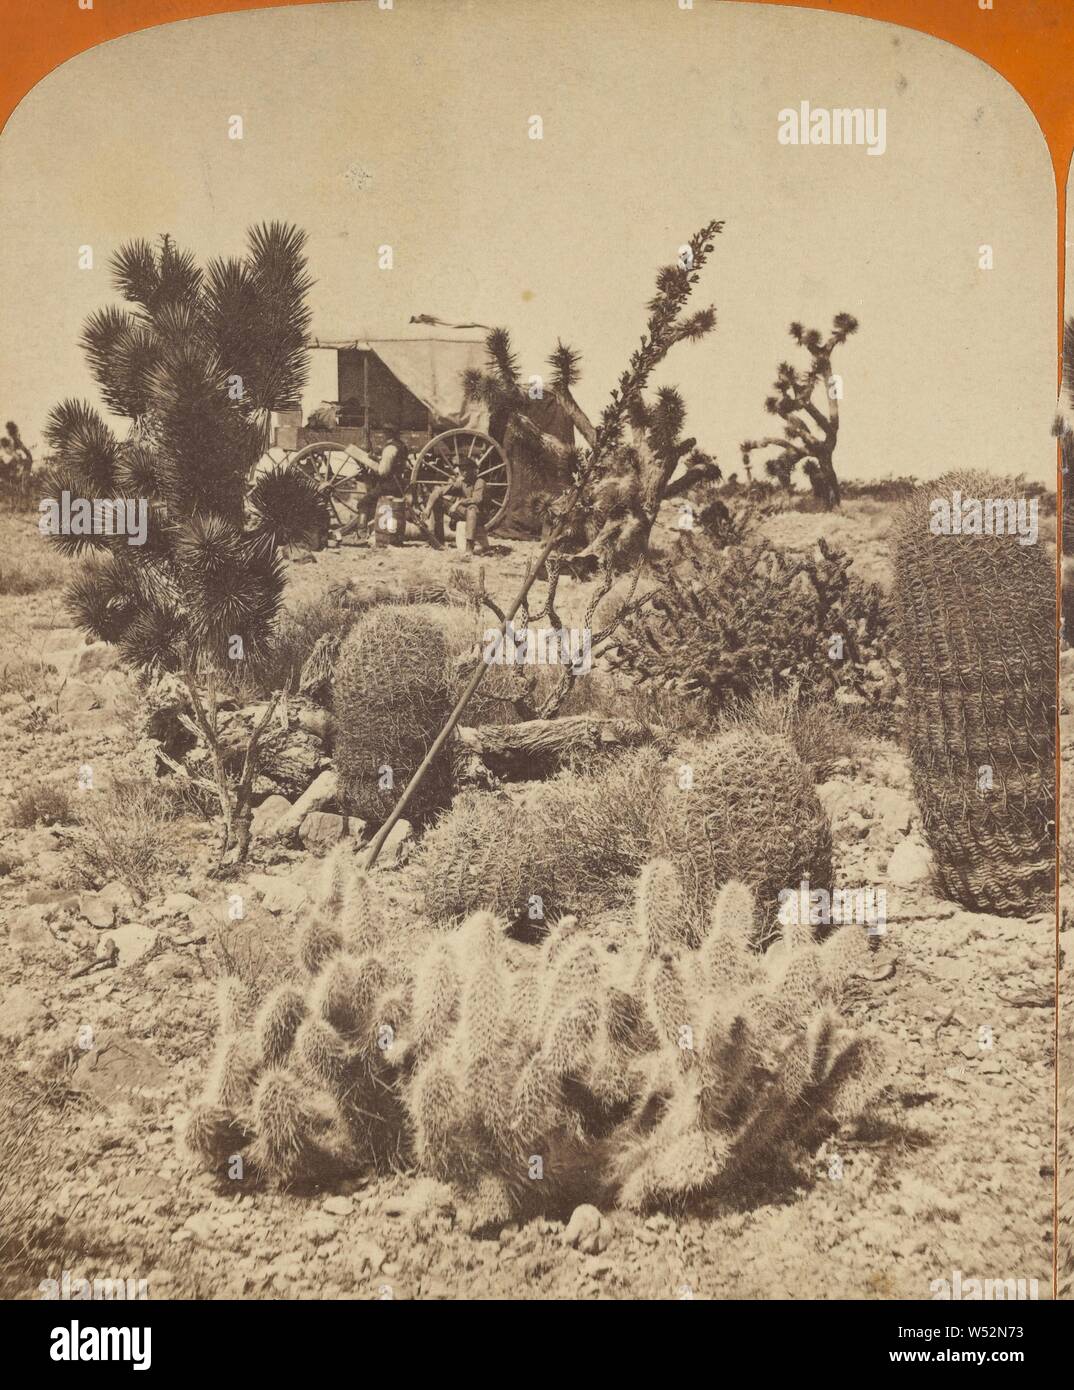 Cactus Study. Desert South of St. George/ Charles Roscoe Savage's photo wagon in background, C.R. Savage (American, born England, 1832 - 1909), 1866, Albumen silver print Stock Photo